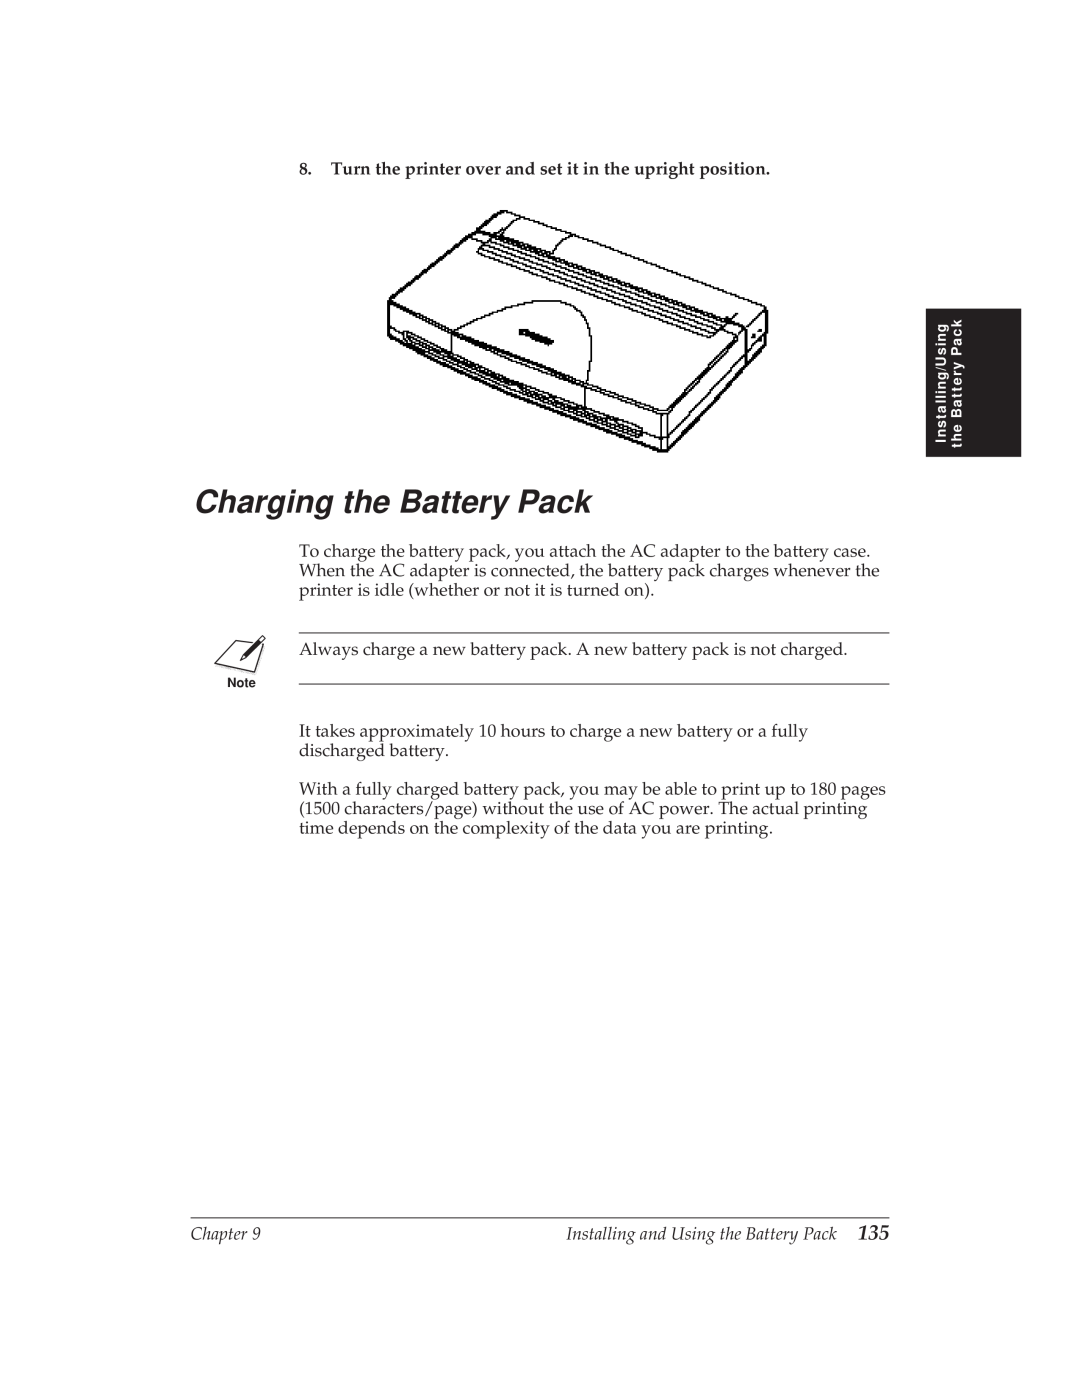 Canon BJ-30 manual Charging the Battery Pack, Turn the printer over and set it in the upright position 